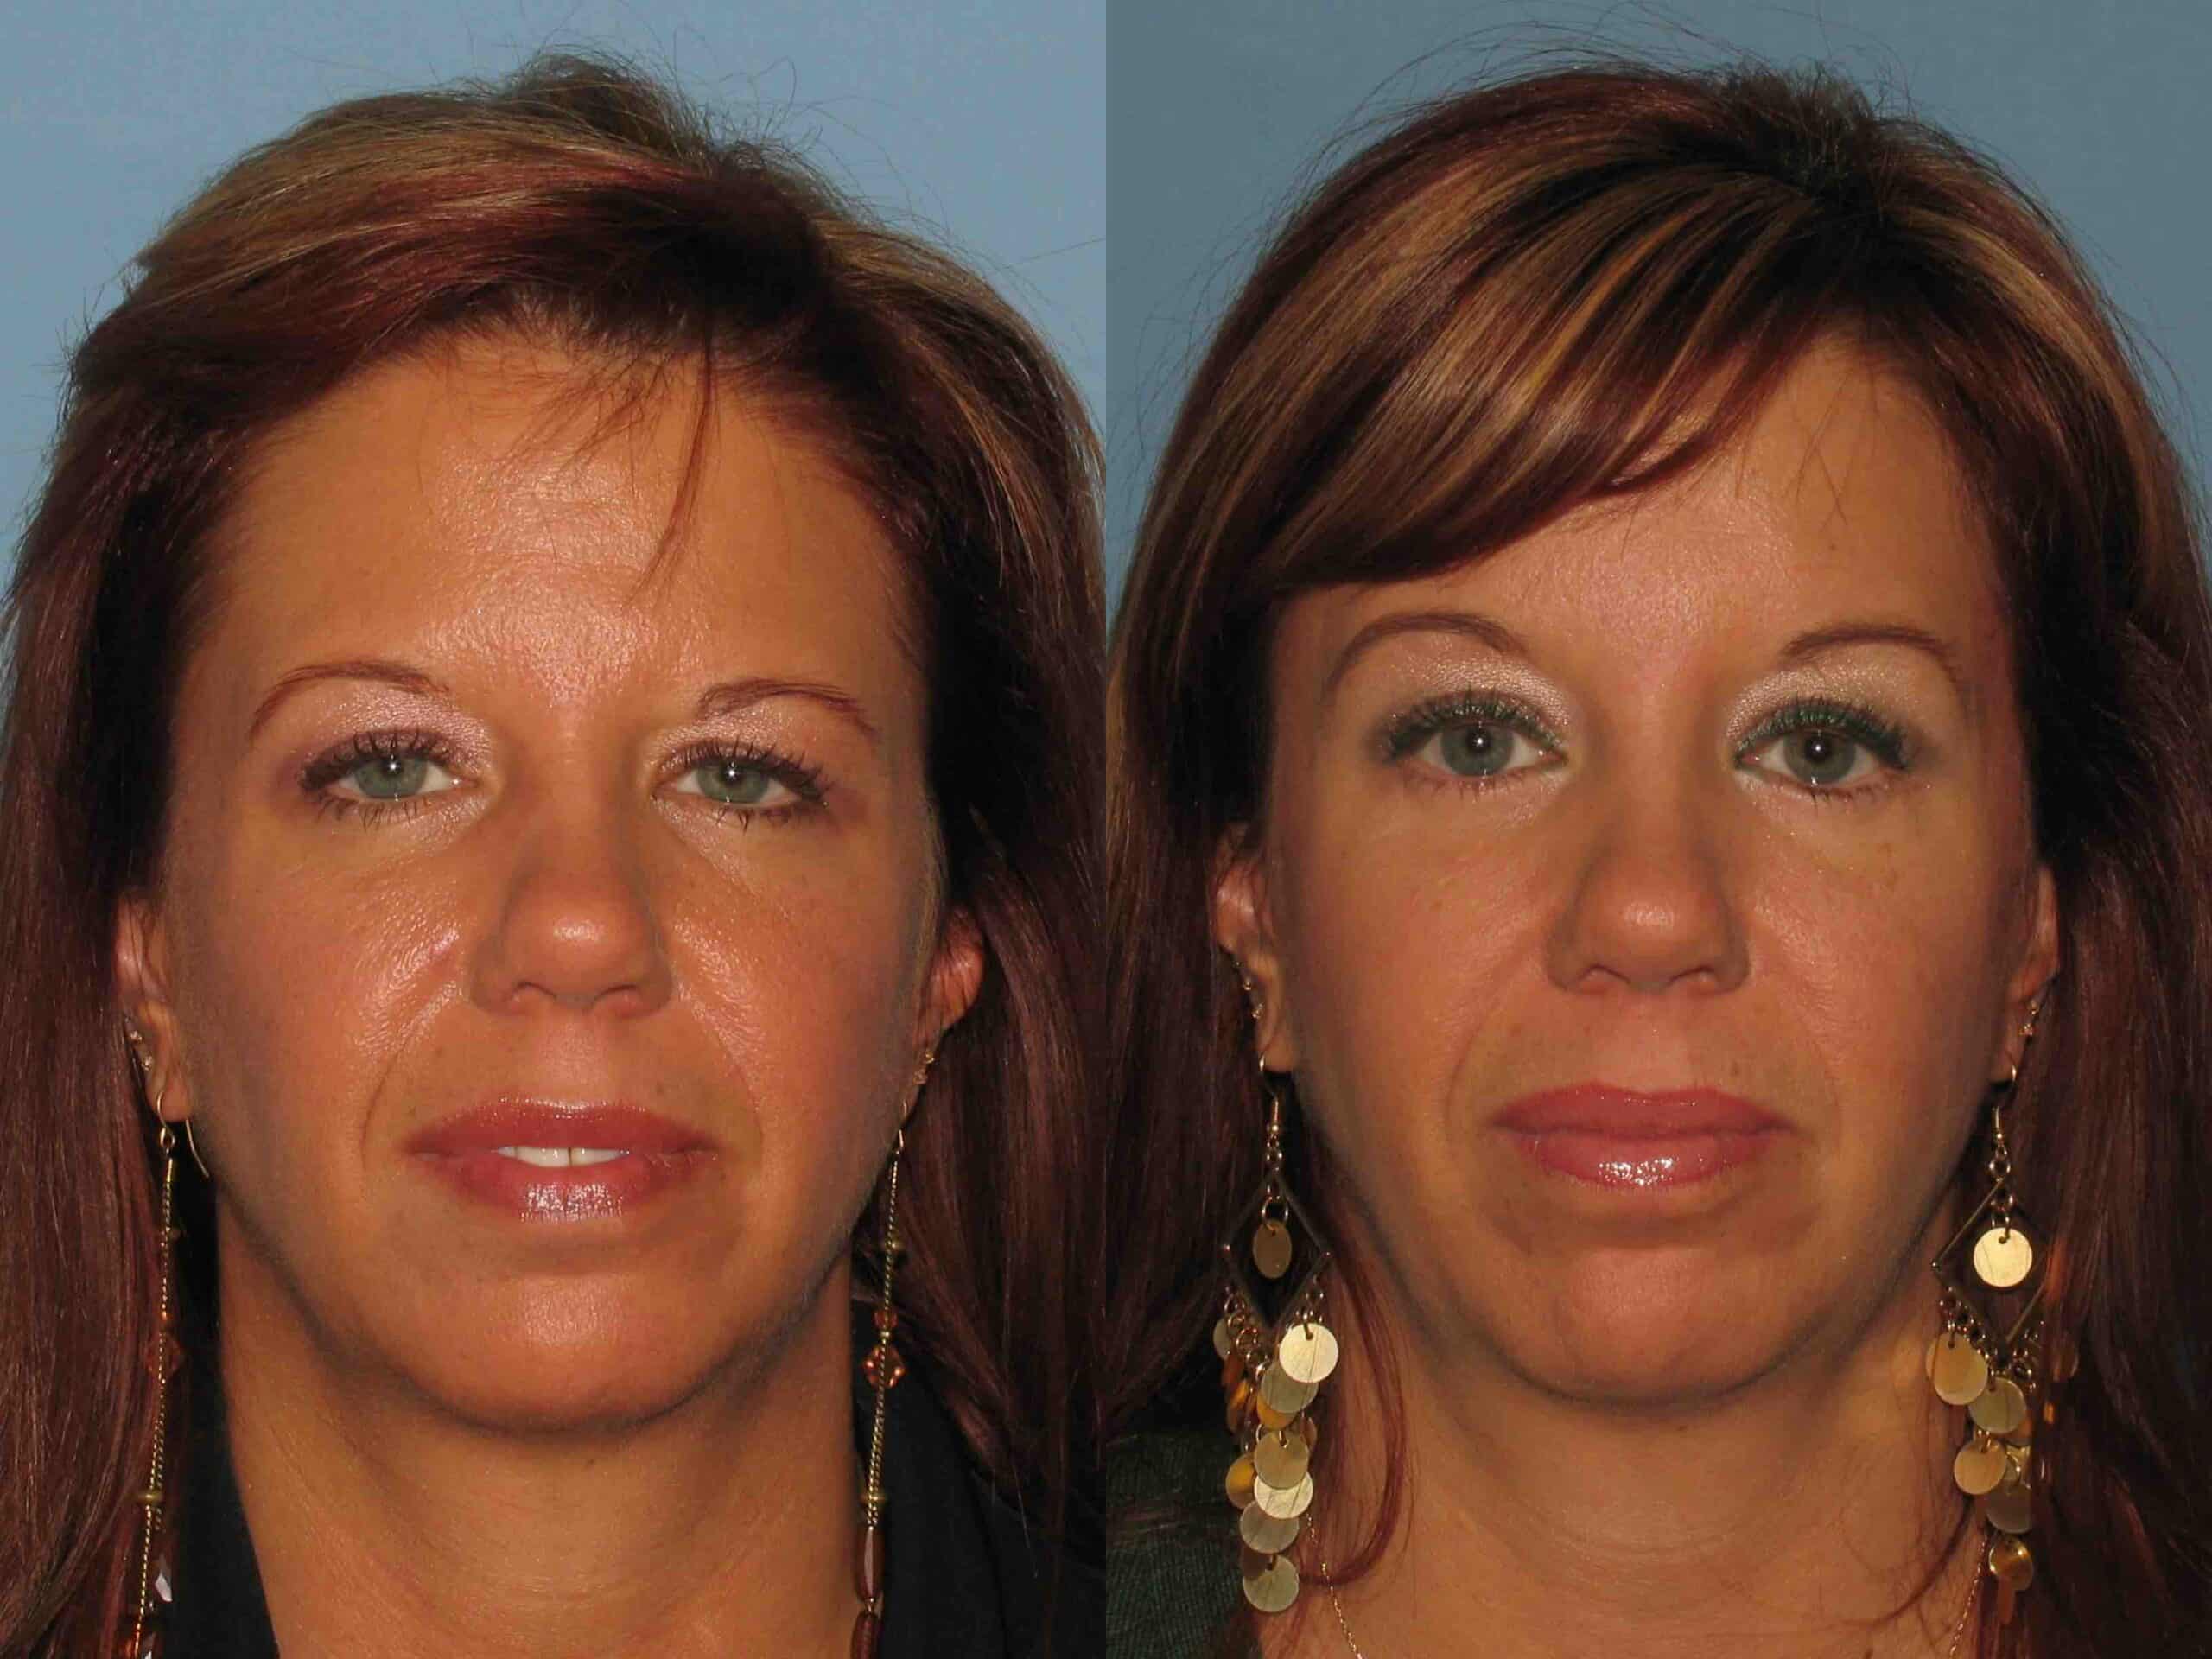 Before and after, 6 mo post op from Lower Blepharoplasty, Endo Brow Lift (front view)